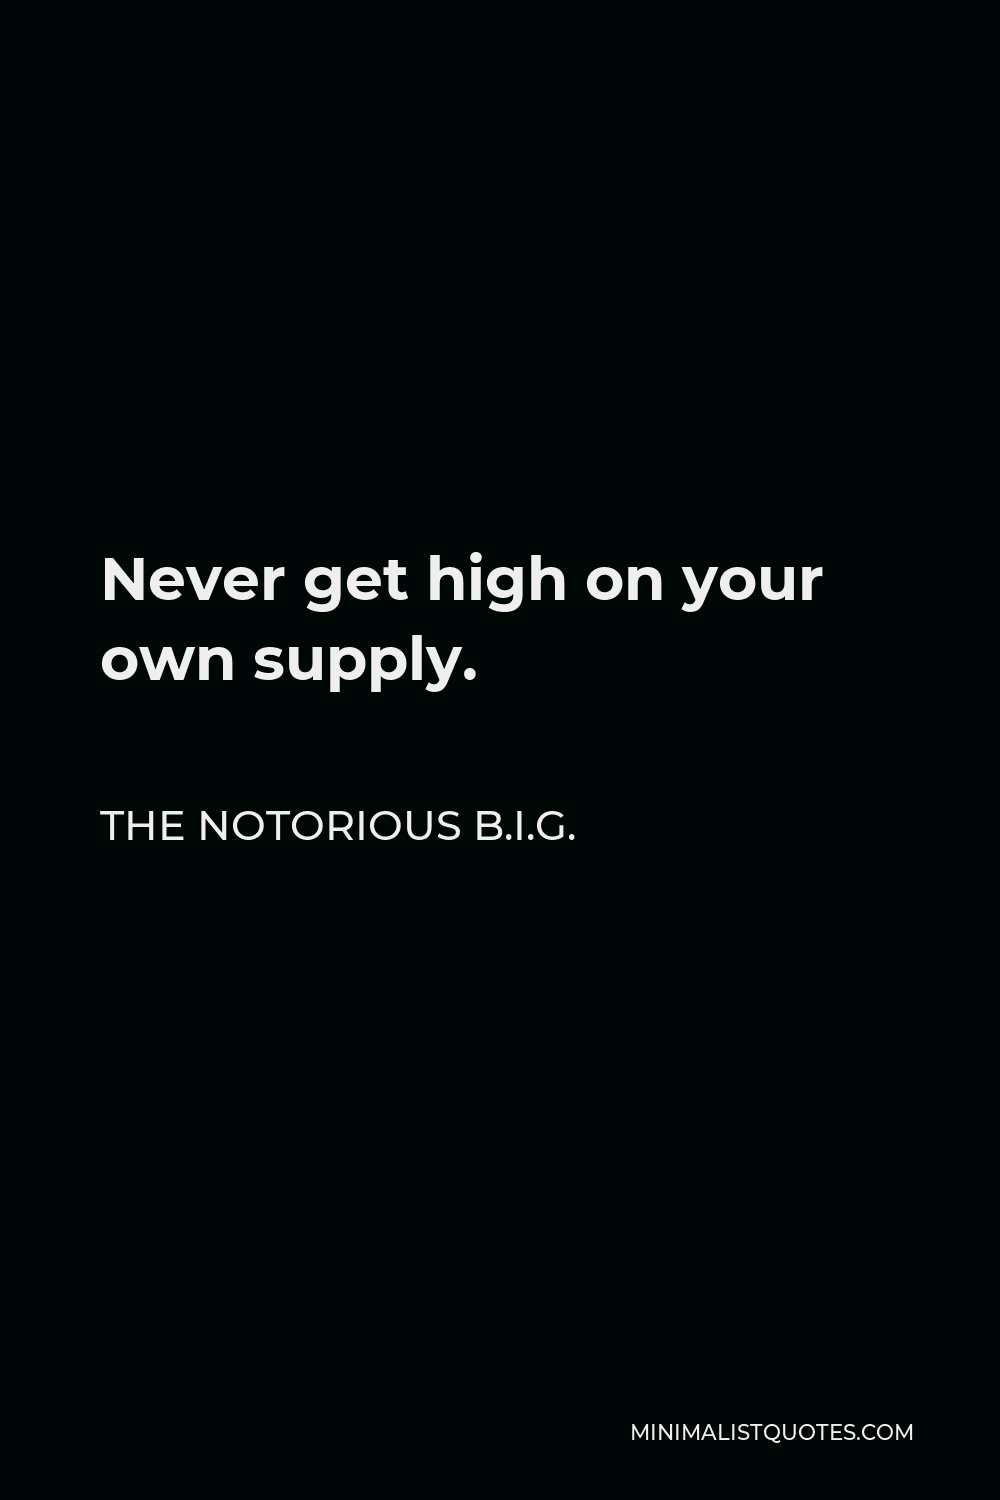 The Notorious B.I.G. Quote - Never get high on your own supply.